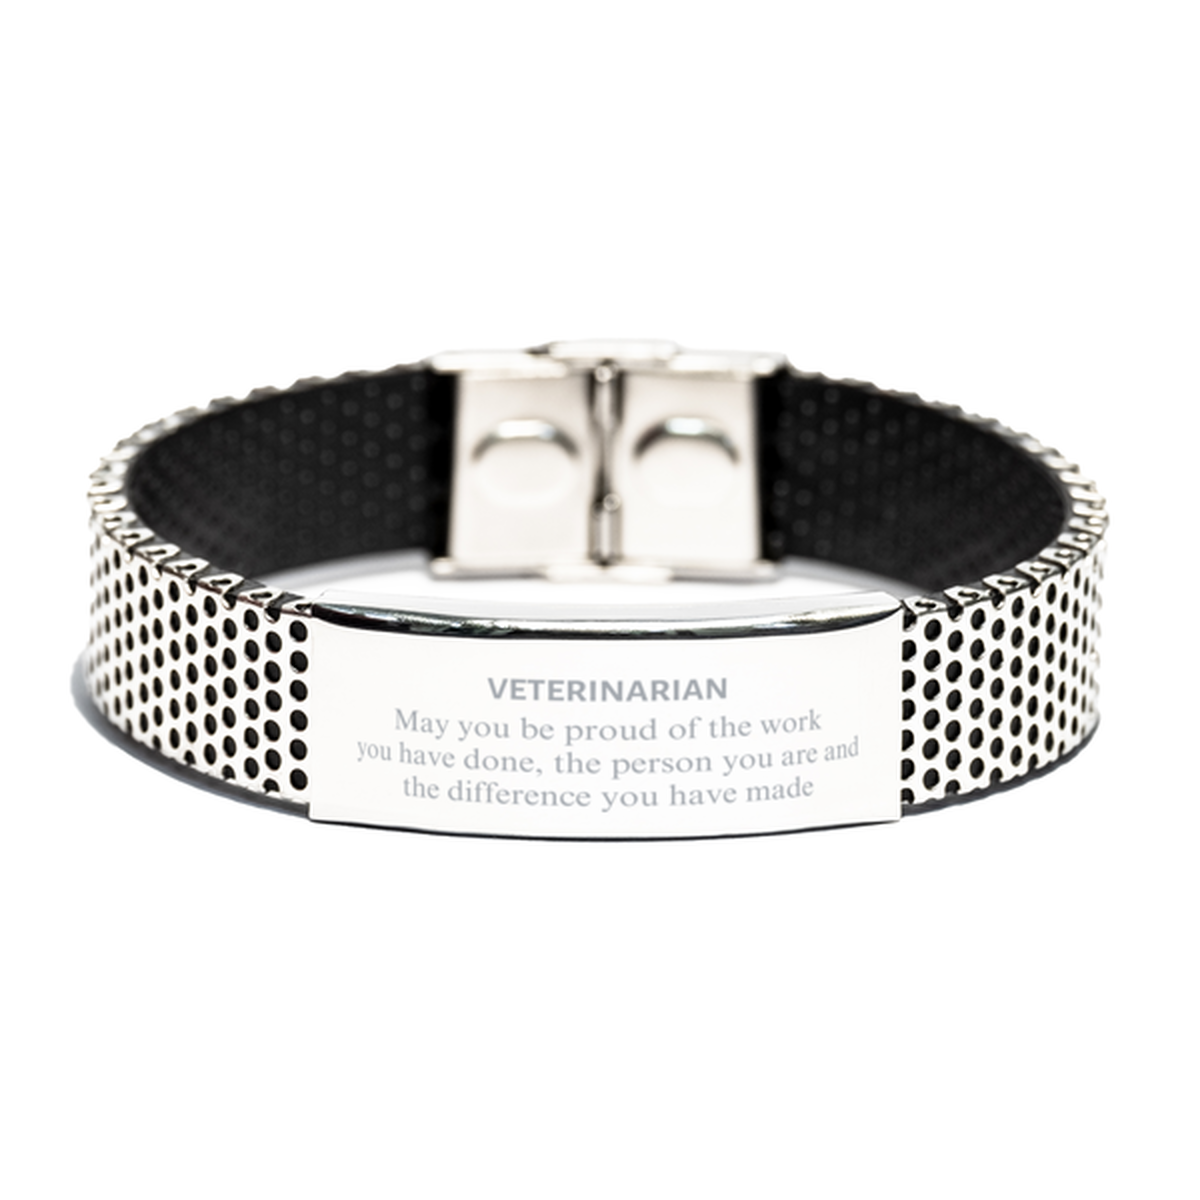 Veterinarian May you be proud of the work you have done, Retirement Veterinarian Stainless Steel Bracelet for Colleague Appreciation Gifts Amazing for Veterinarian